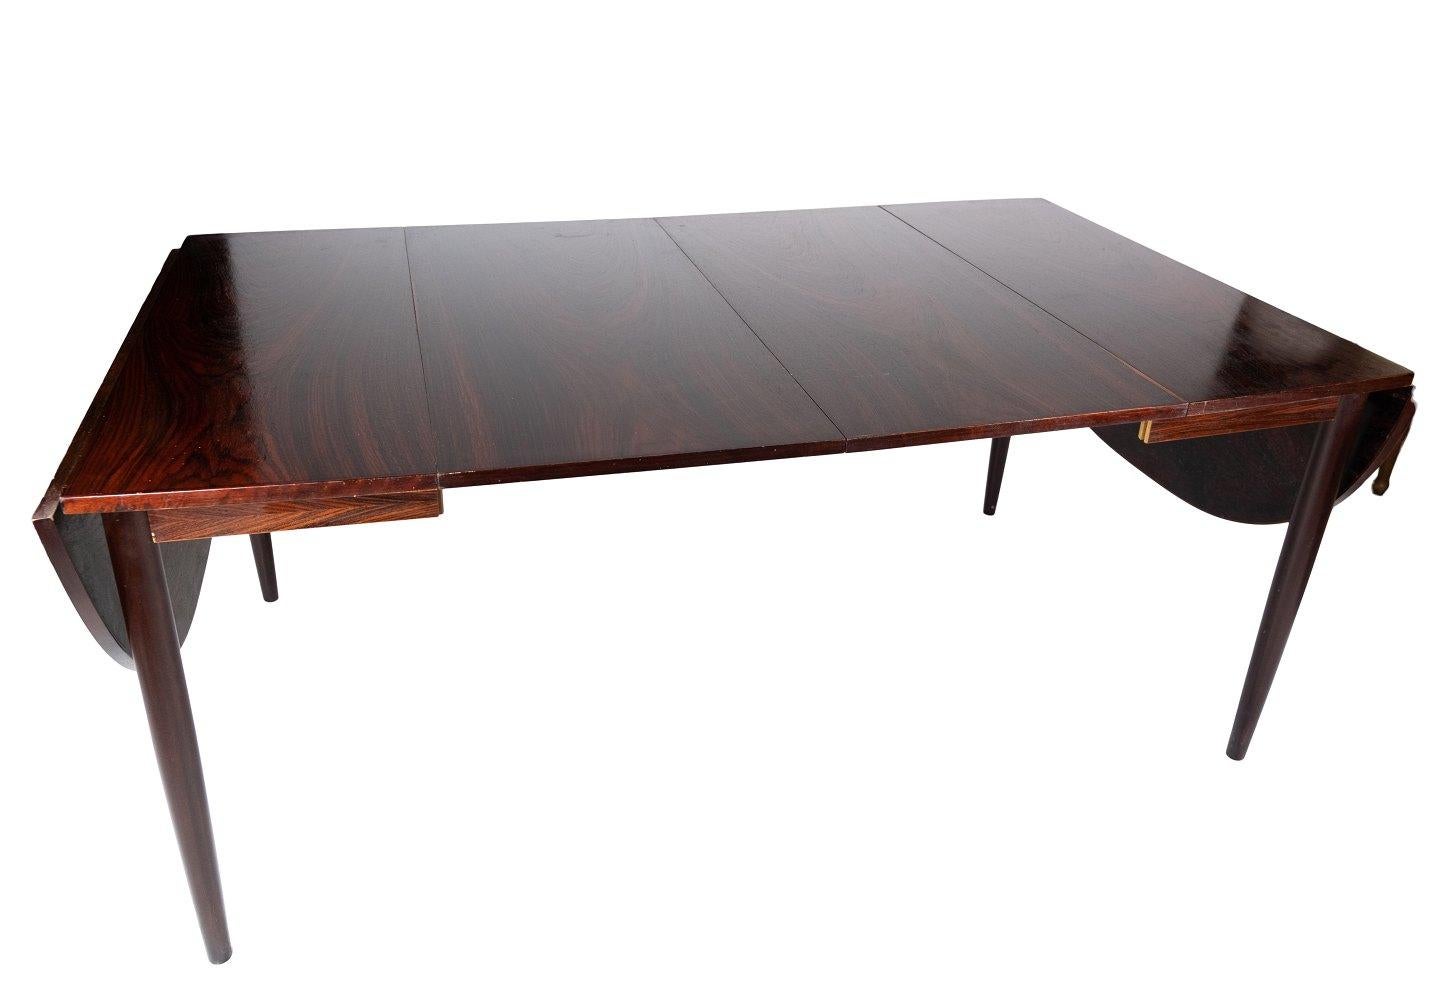 Scandinavian Modern Dining Table in Rosewood with Extensions Designed by Arne Vodder from the 1960s For Sale